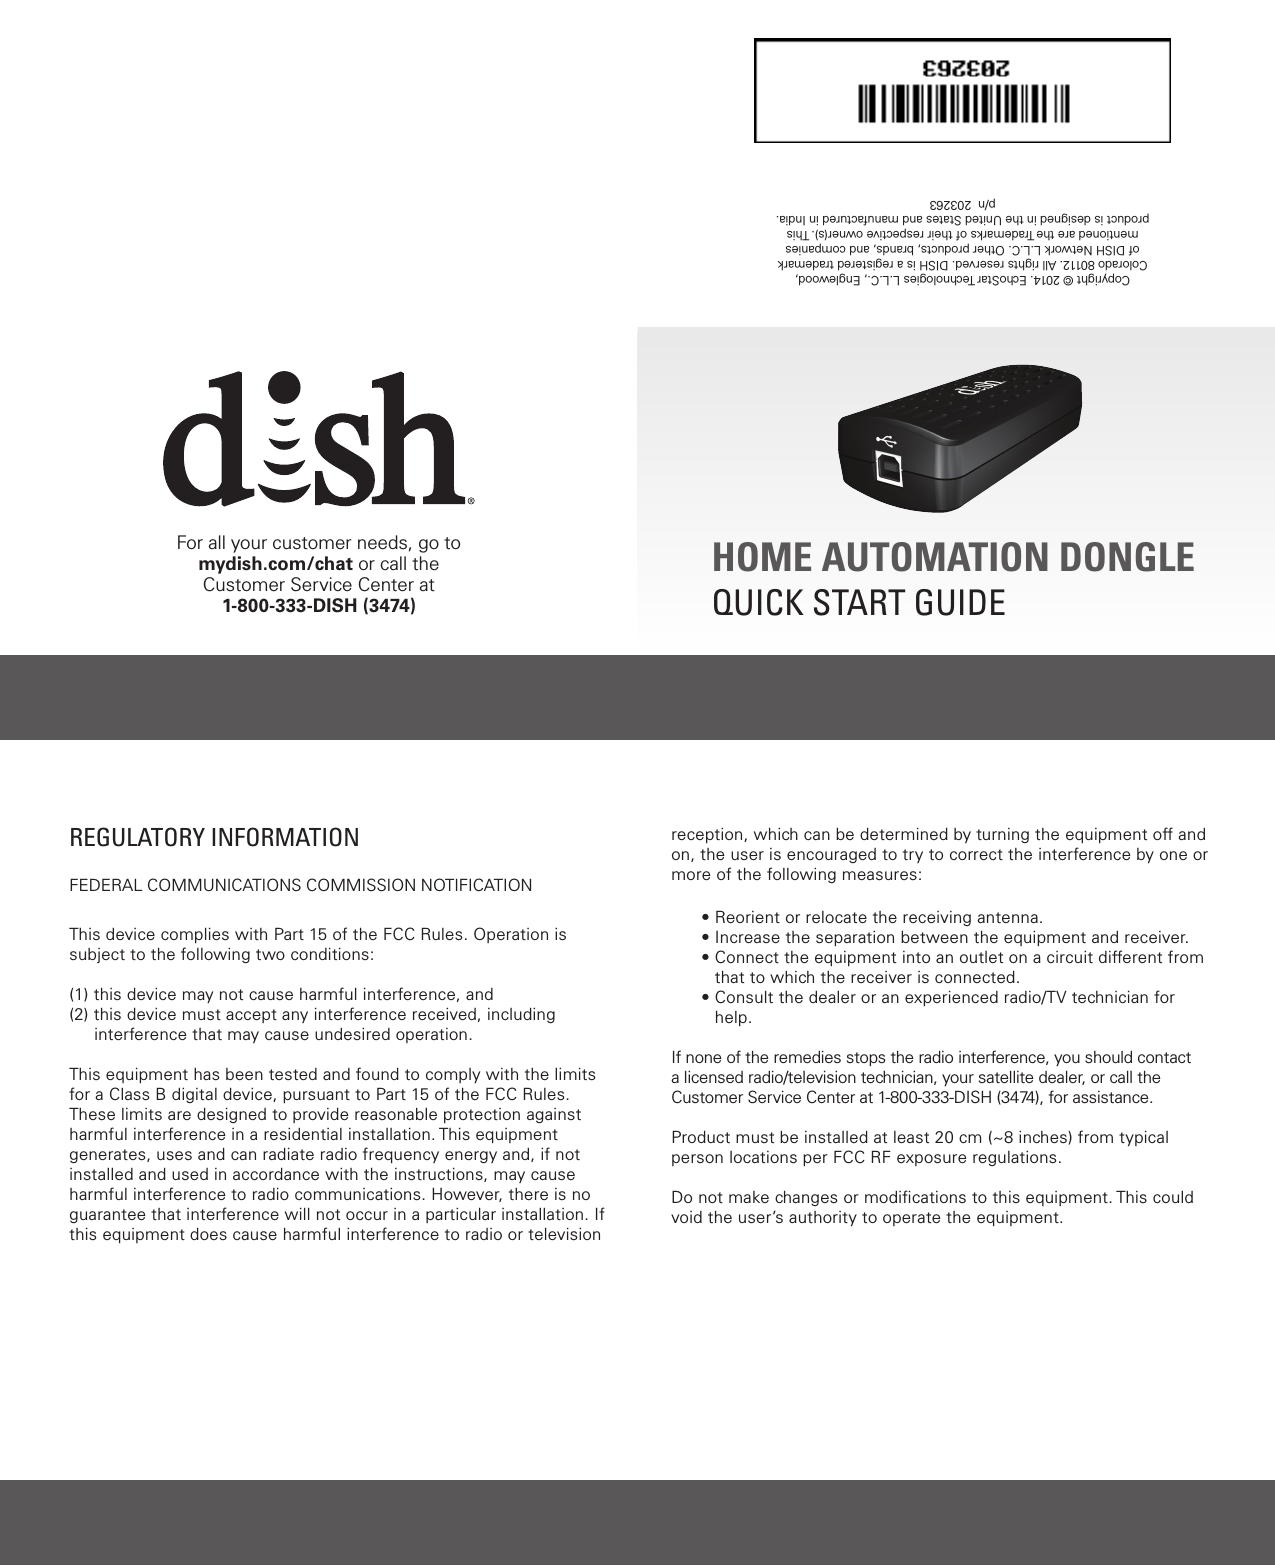  HOME AUTOMATION DONGLEQUICK START GUIDECopyright © 2014. EchoStar Technologies L.L.C., Englewood, Colorado 80112. All rights reserved. DISH is a registered trademark of DISH Network L.L.C. Other products, brands, and companies mentioned are the Trademarks of their respective owner(s). This product is designed in the United States and manufactured in India.   p/n  203263For all your customer needs, go tomydish.com/chat or call the Customer Service Center at1-800-333-DISH (3474)REGULATORY INFORMATIONFEDERAL COMMUNICATIONS COMMISSION NOTIFICATIONThis device complies with Part 15 of the FCC Rules. Operation is subject to the following two conditions: (1) this device may not cause harmful interference, and (2)  this device must accept any interference received, including     interference that may cause undesired operation.  This equipment has been tested and found to comply with the limits for a Class B digital device, pursuant to Part 15 of the FCC Rules. These limits are designed to provide reasonable protection against harmful interference in a residential installation. This equipment generates, uses and can radiate radio frequency energy and, if not installed and used in accordance with the instructions, may cause harmful interference to radio communications. However, there is no guarantee that interference will not occur in a particular installation. If this equipment does cause harmful interference to radio or television reception, which can be determined by turning the equipment off and on, the user is encouraged to try to correct the interference by one or more of the following measures:• Reorient or relocate the receiving antenna.• Increase the separation between the equipment and receiver.•  Connect the equipment into an outlet on a circuit different from that to which the receiver is connected.•  Consult the dealer or an experienced radio/TV technician for help.If none of the remedies stops the radio interference, you should contact a licensed radio/television technician, your satellite dealer, or call the Customer Service Center at 1-800-333-DISH (3474), for assistance.Product must be installed at least 20 cm (~8 inches) from typical person locations per FCC RF exposure regulations.Do not make changes or modiﬁcations to this equipment. This could void the user’s authority to operate the equipment.